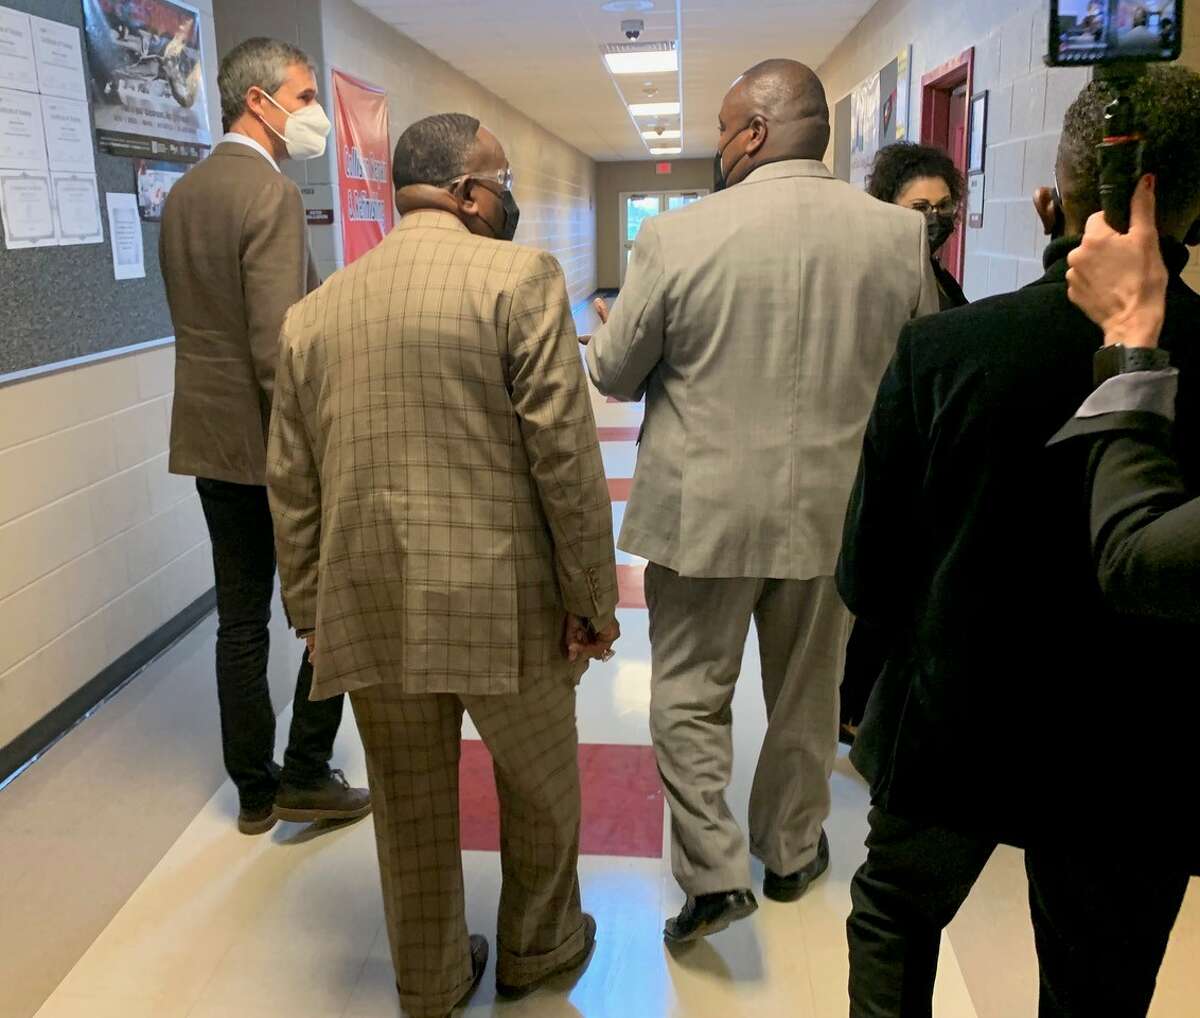 Beto O'Rourke, left, Port Arthur Mayor Thurman "Bill" Bartie and Career and Technology Educational Director Kevin Johnson walk through the halls of Memorial High School. Photo taken March 9, 2022. Olivia Malick/The Enterprise